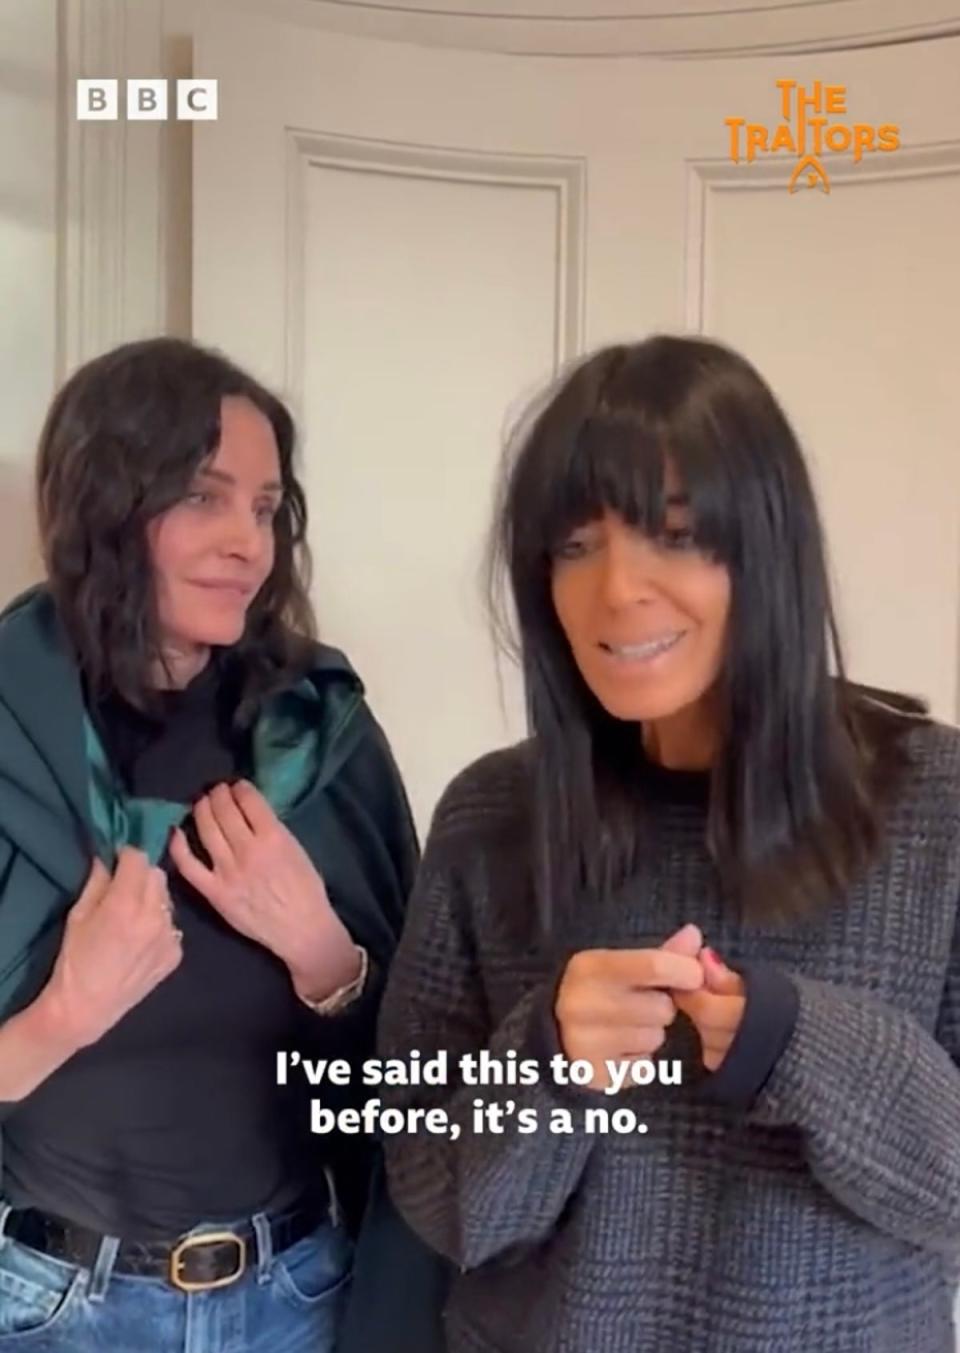 A social media clip from April 2023 of Claudia Winkleman (right) roping in Courtney Cox (left) to promote the second series of The Traitors has resurfaced (BBC One)